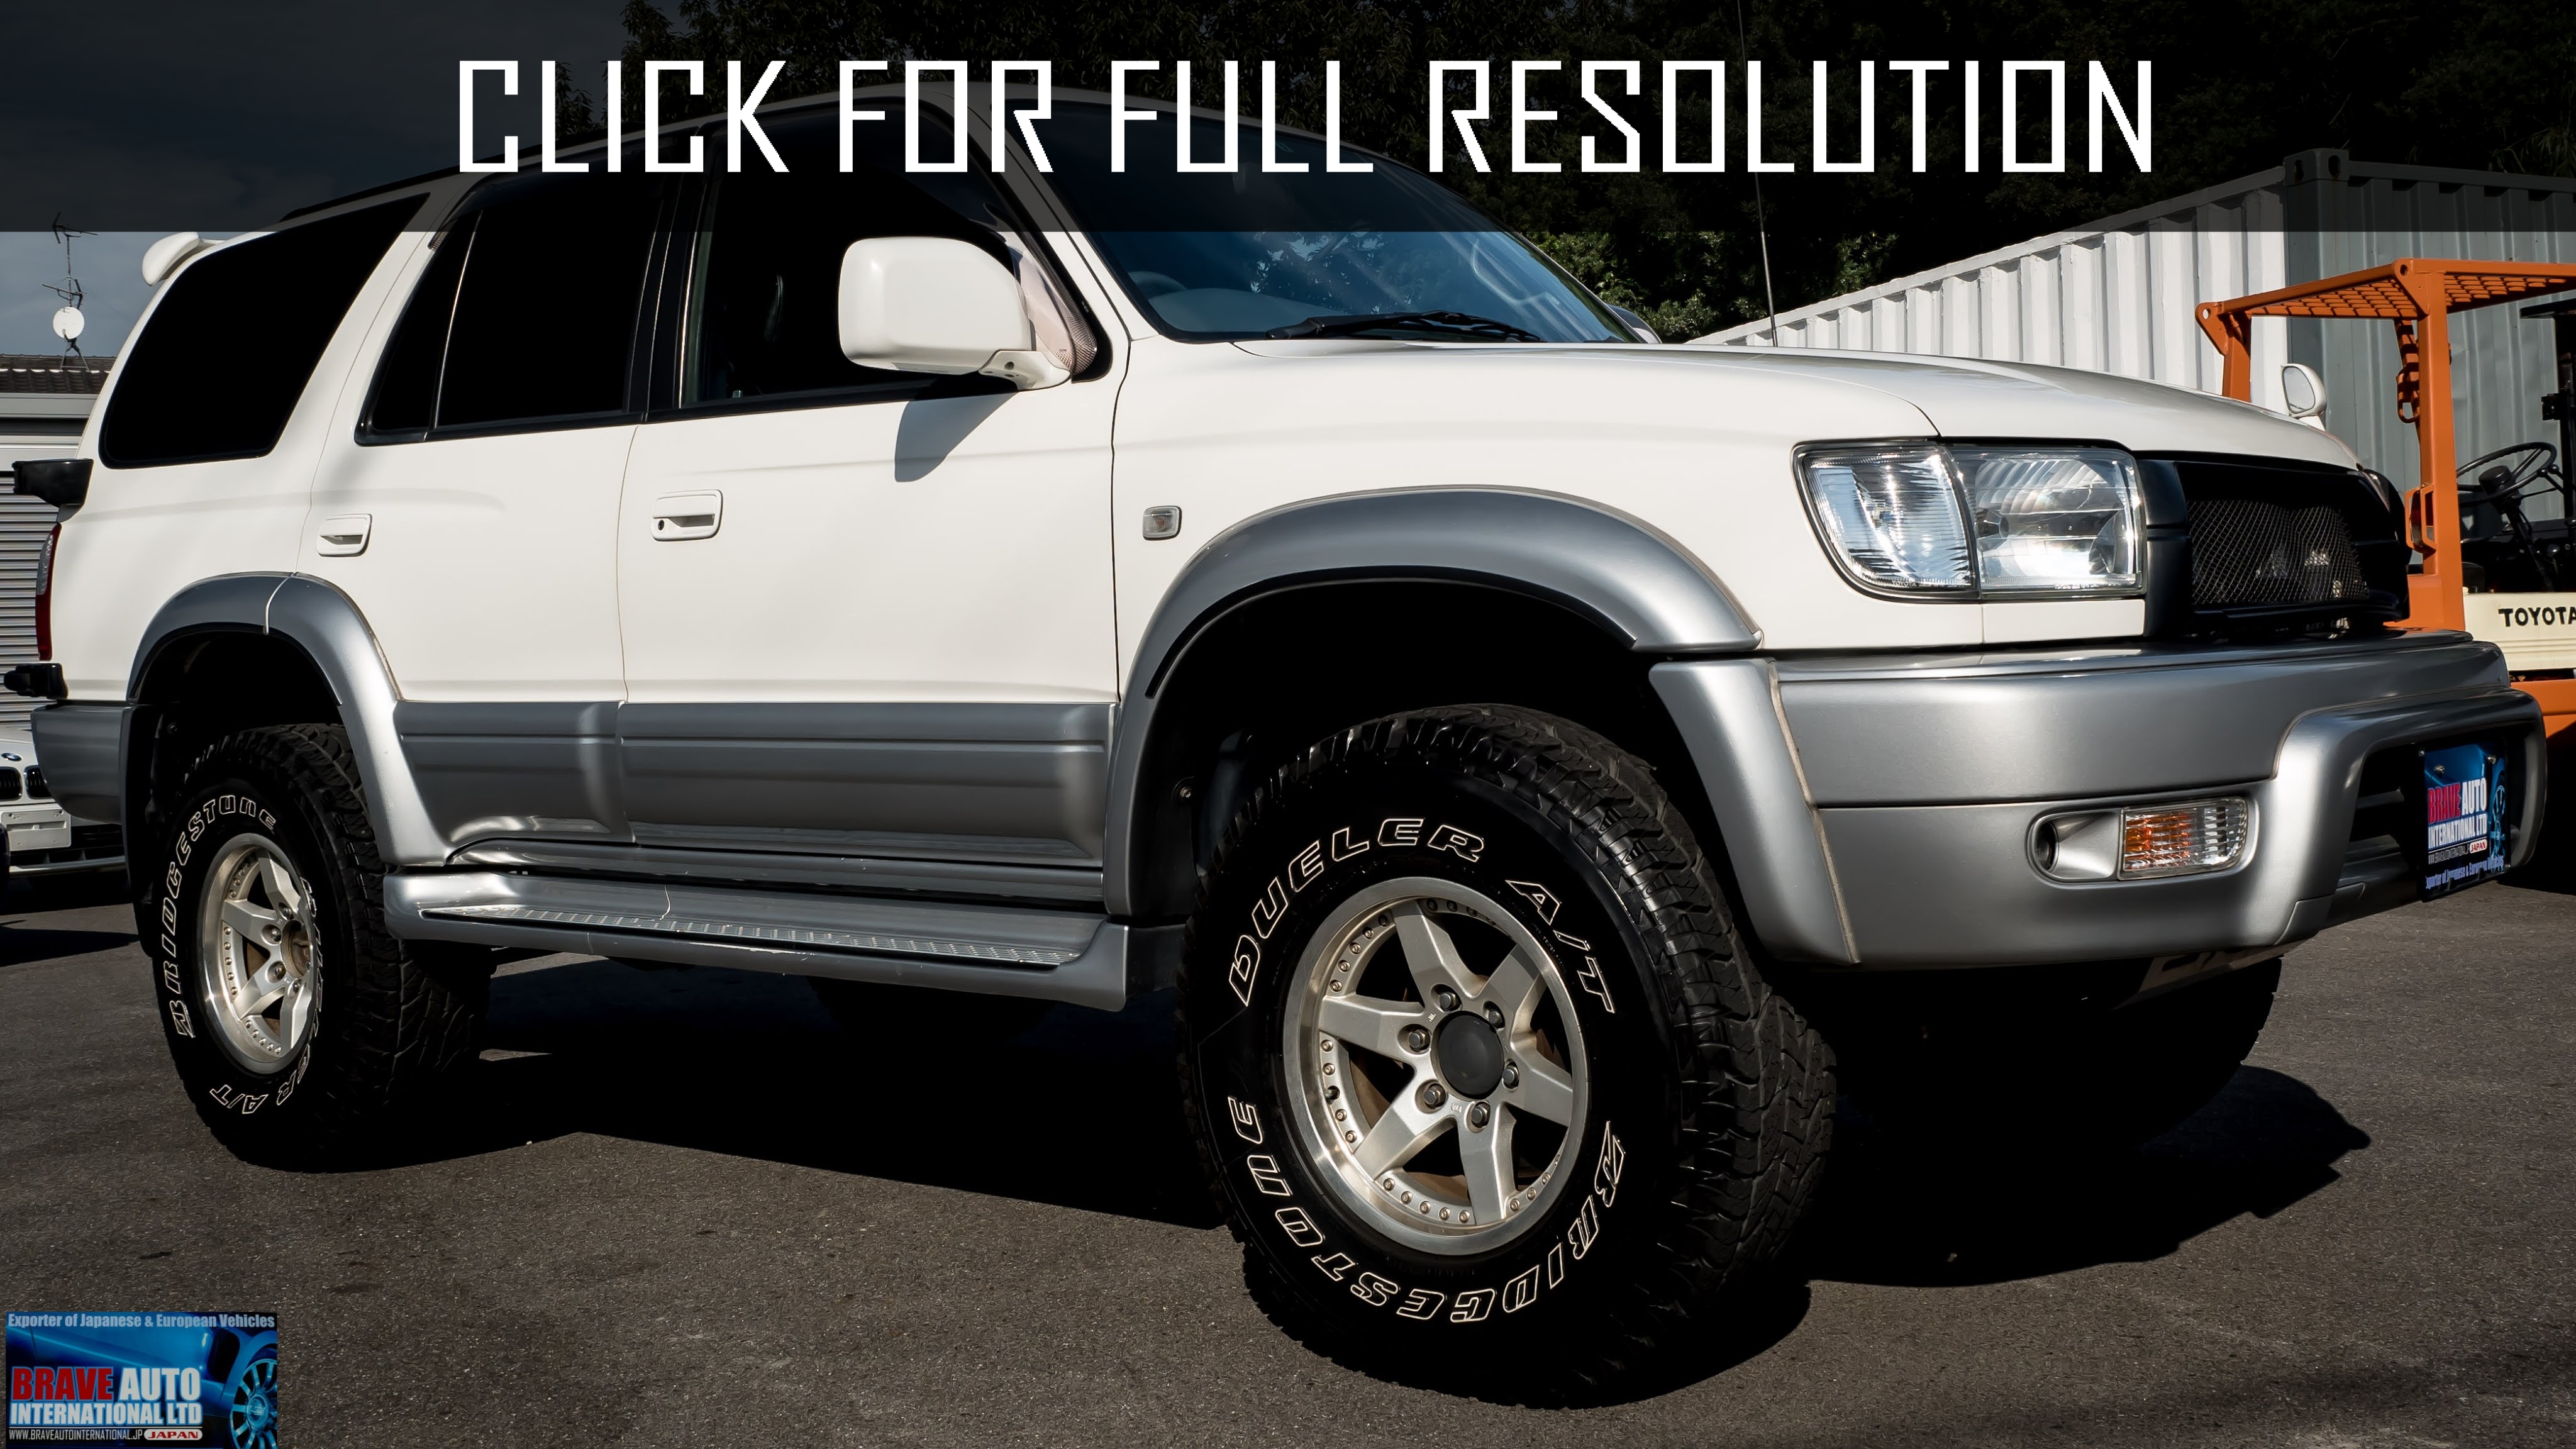 Toyota Hilux Surf Ssr X amazing photo gallery, some information and